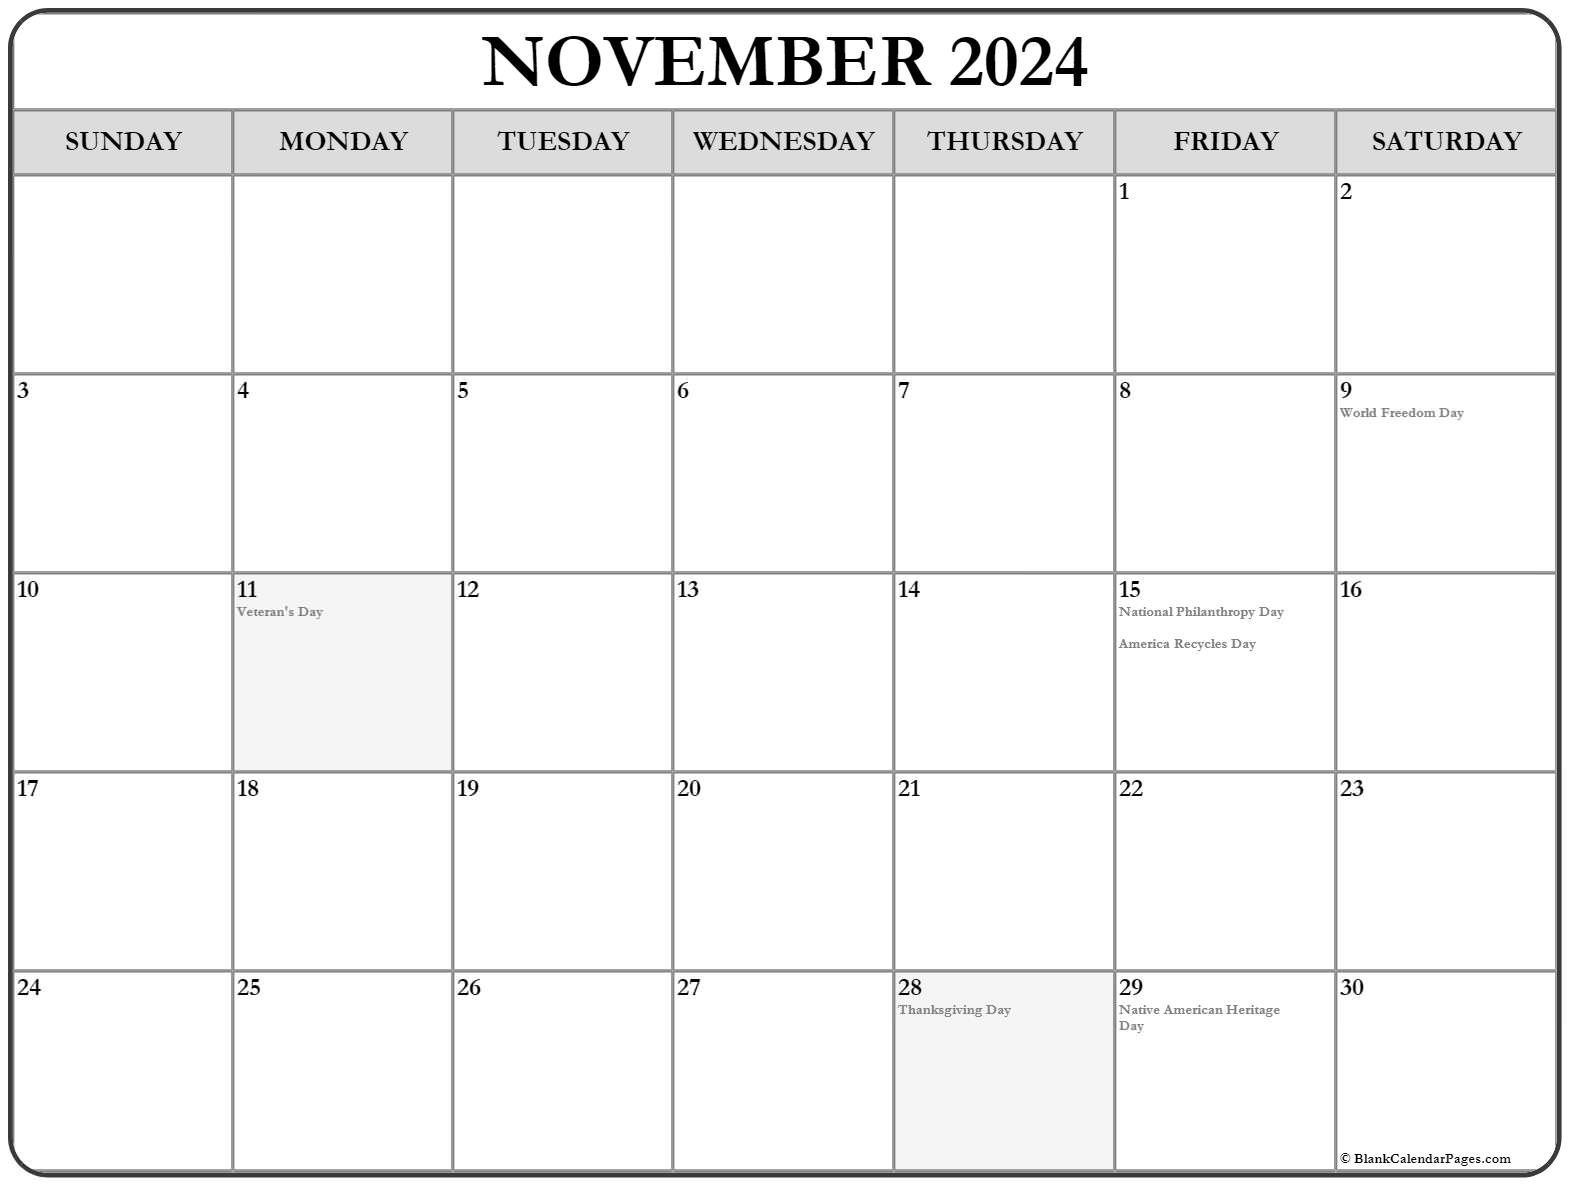 Baps Calendar November 2024 Cool Perfect Awesome Famous Lunar Events